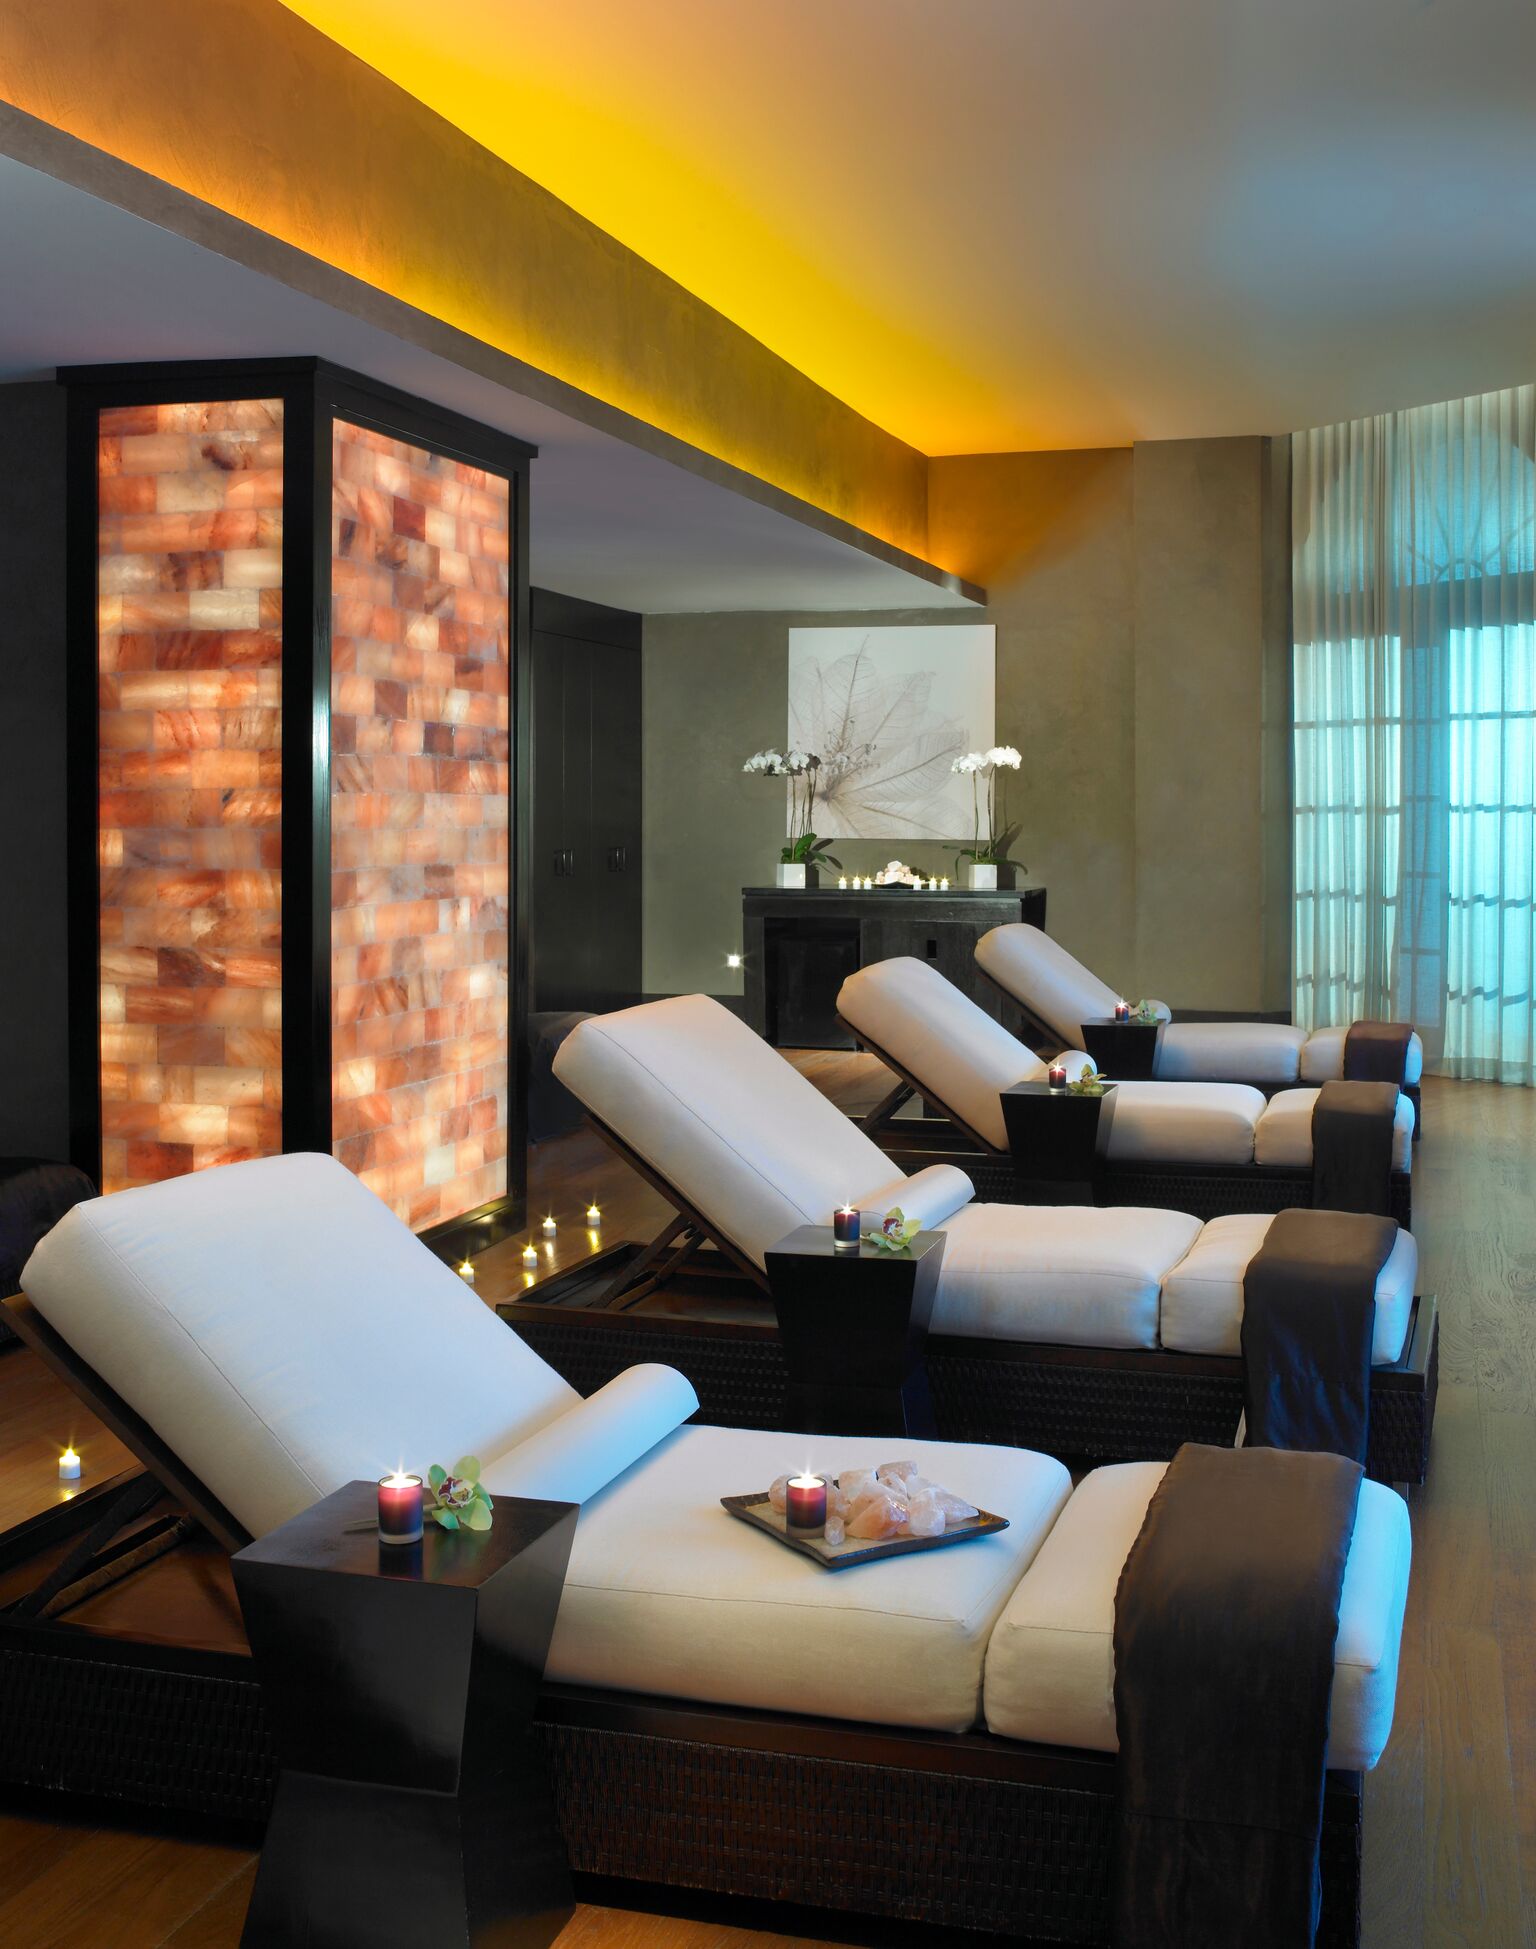 Enjoy  total relaxation and rejuvenation at Acqualina Spa by Espa.